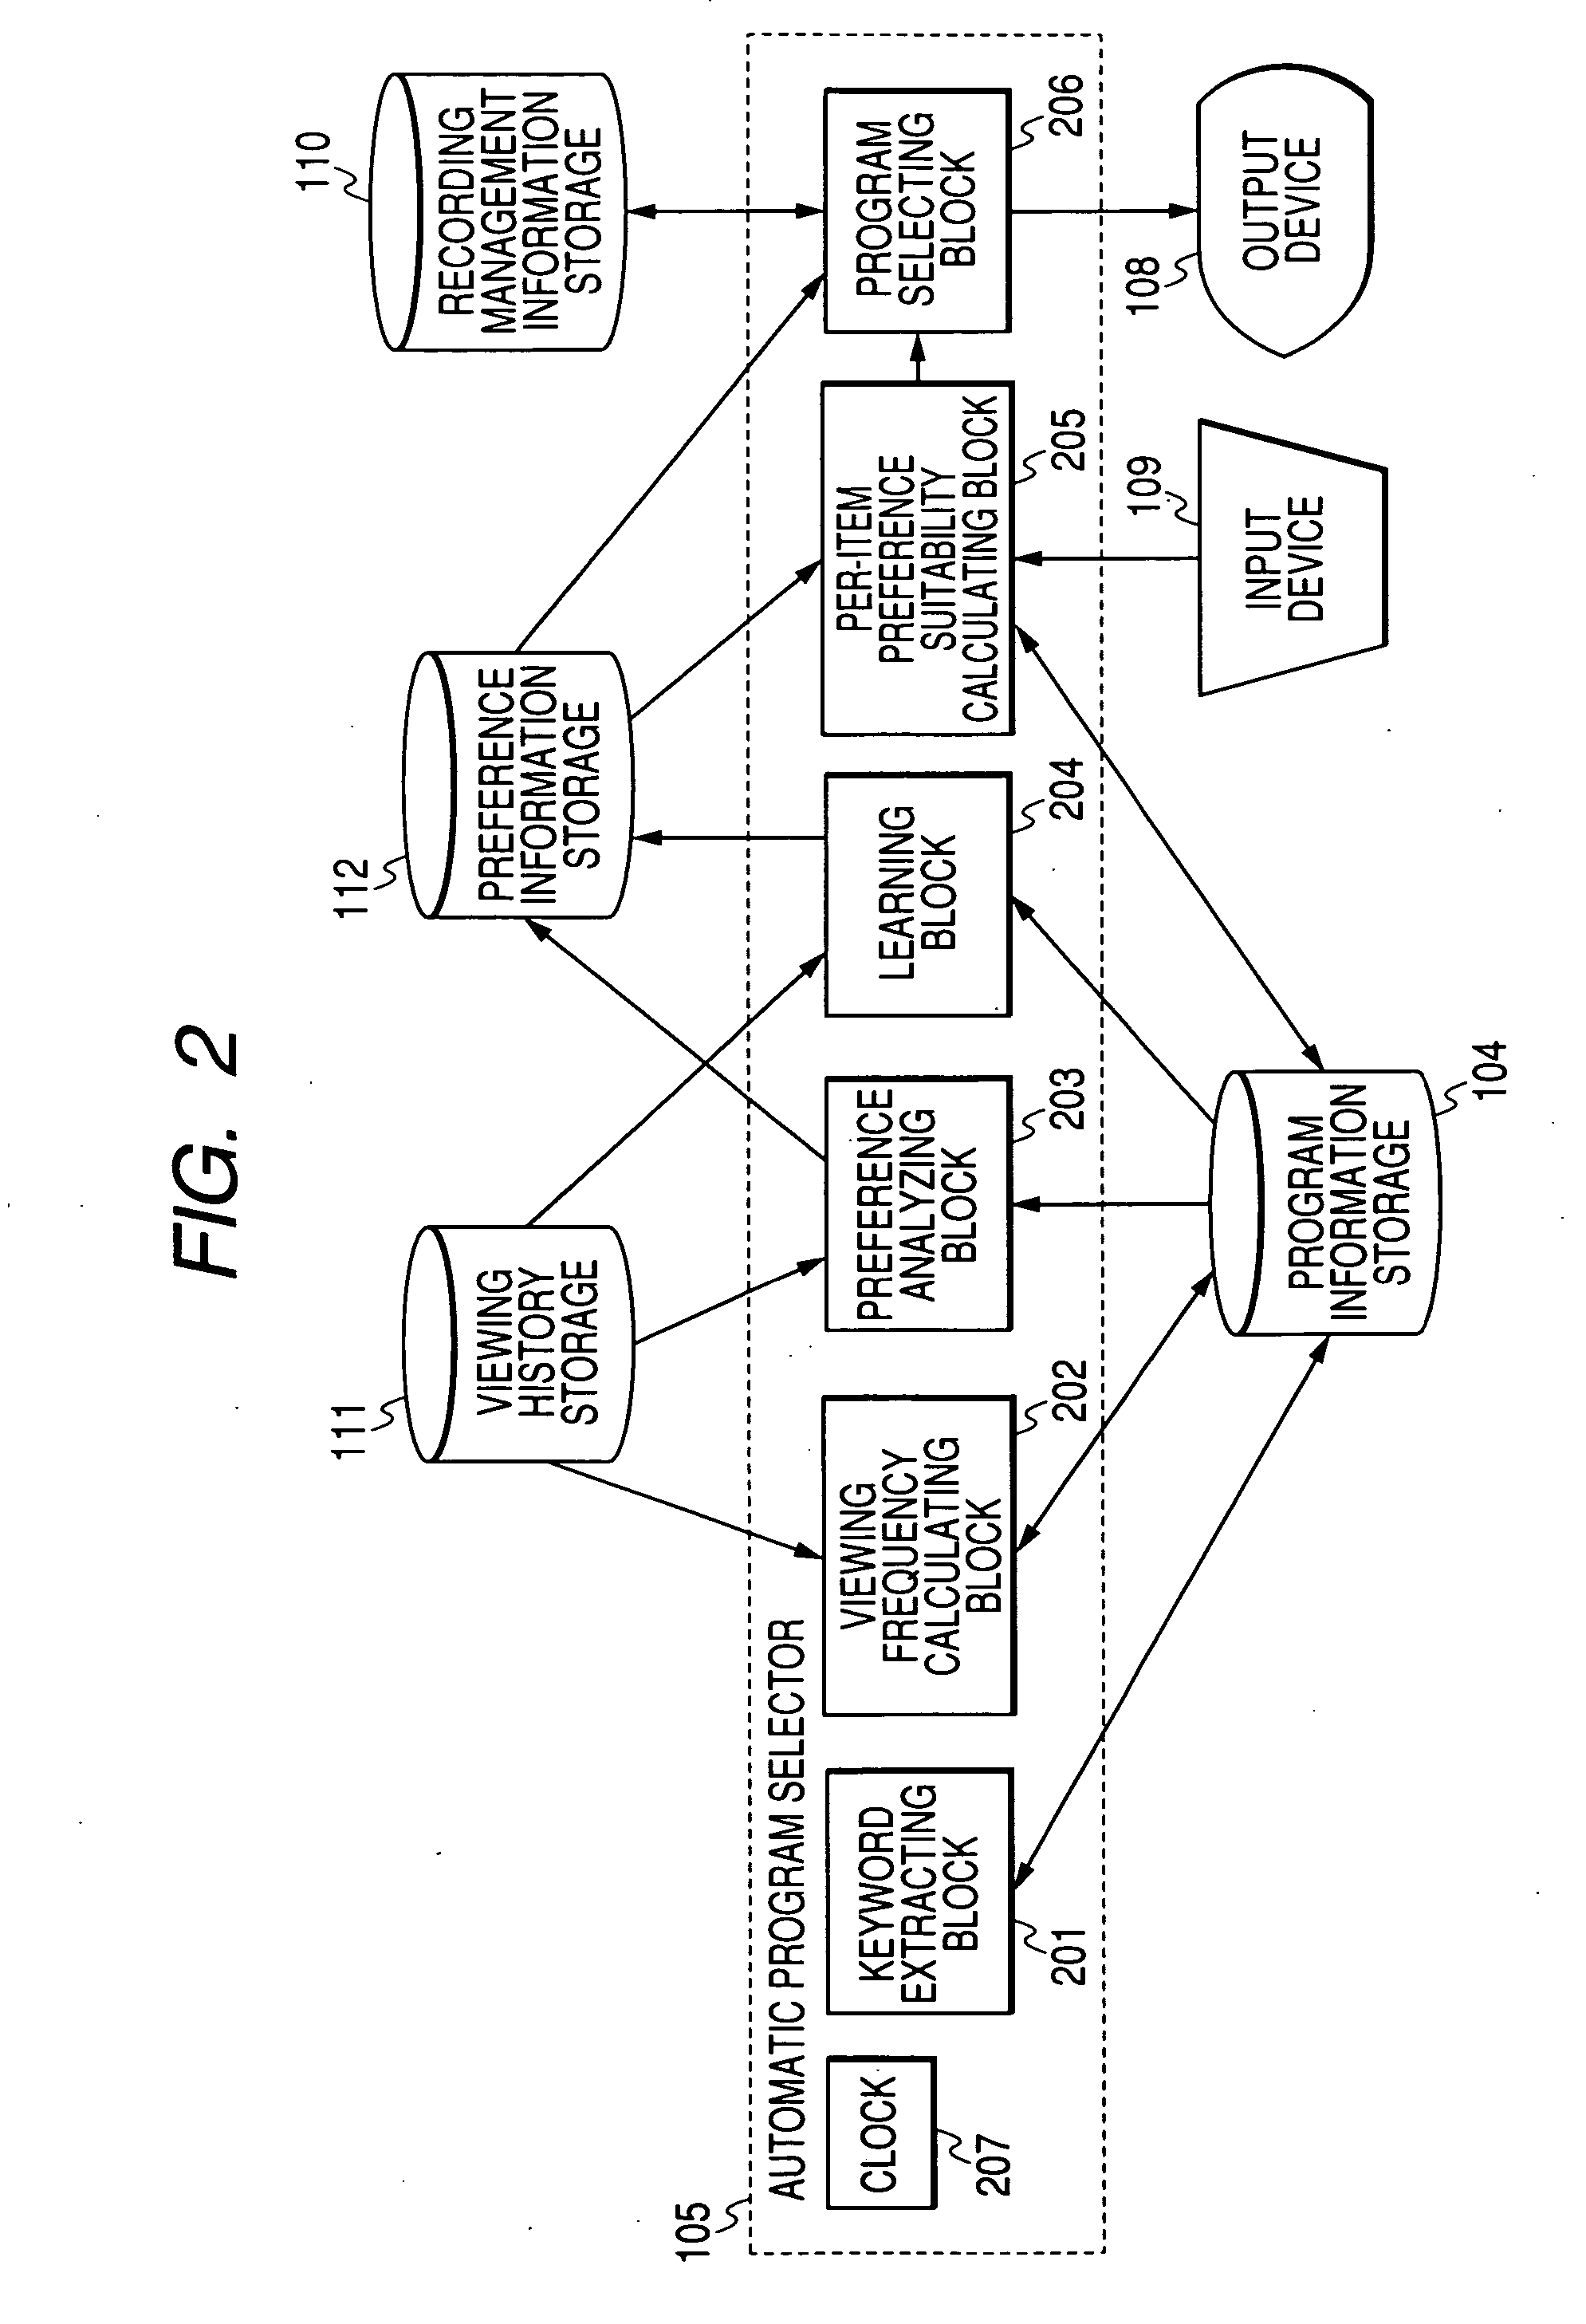 Method and apparatus for ranking broadcast programs